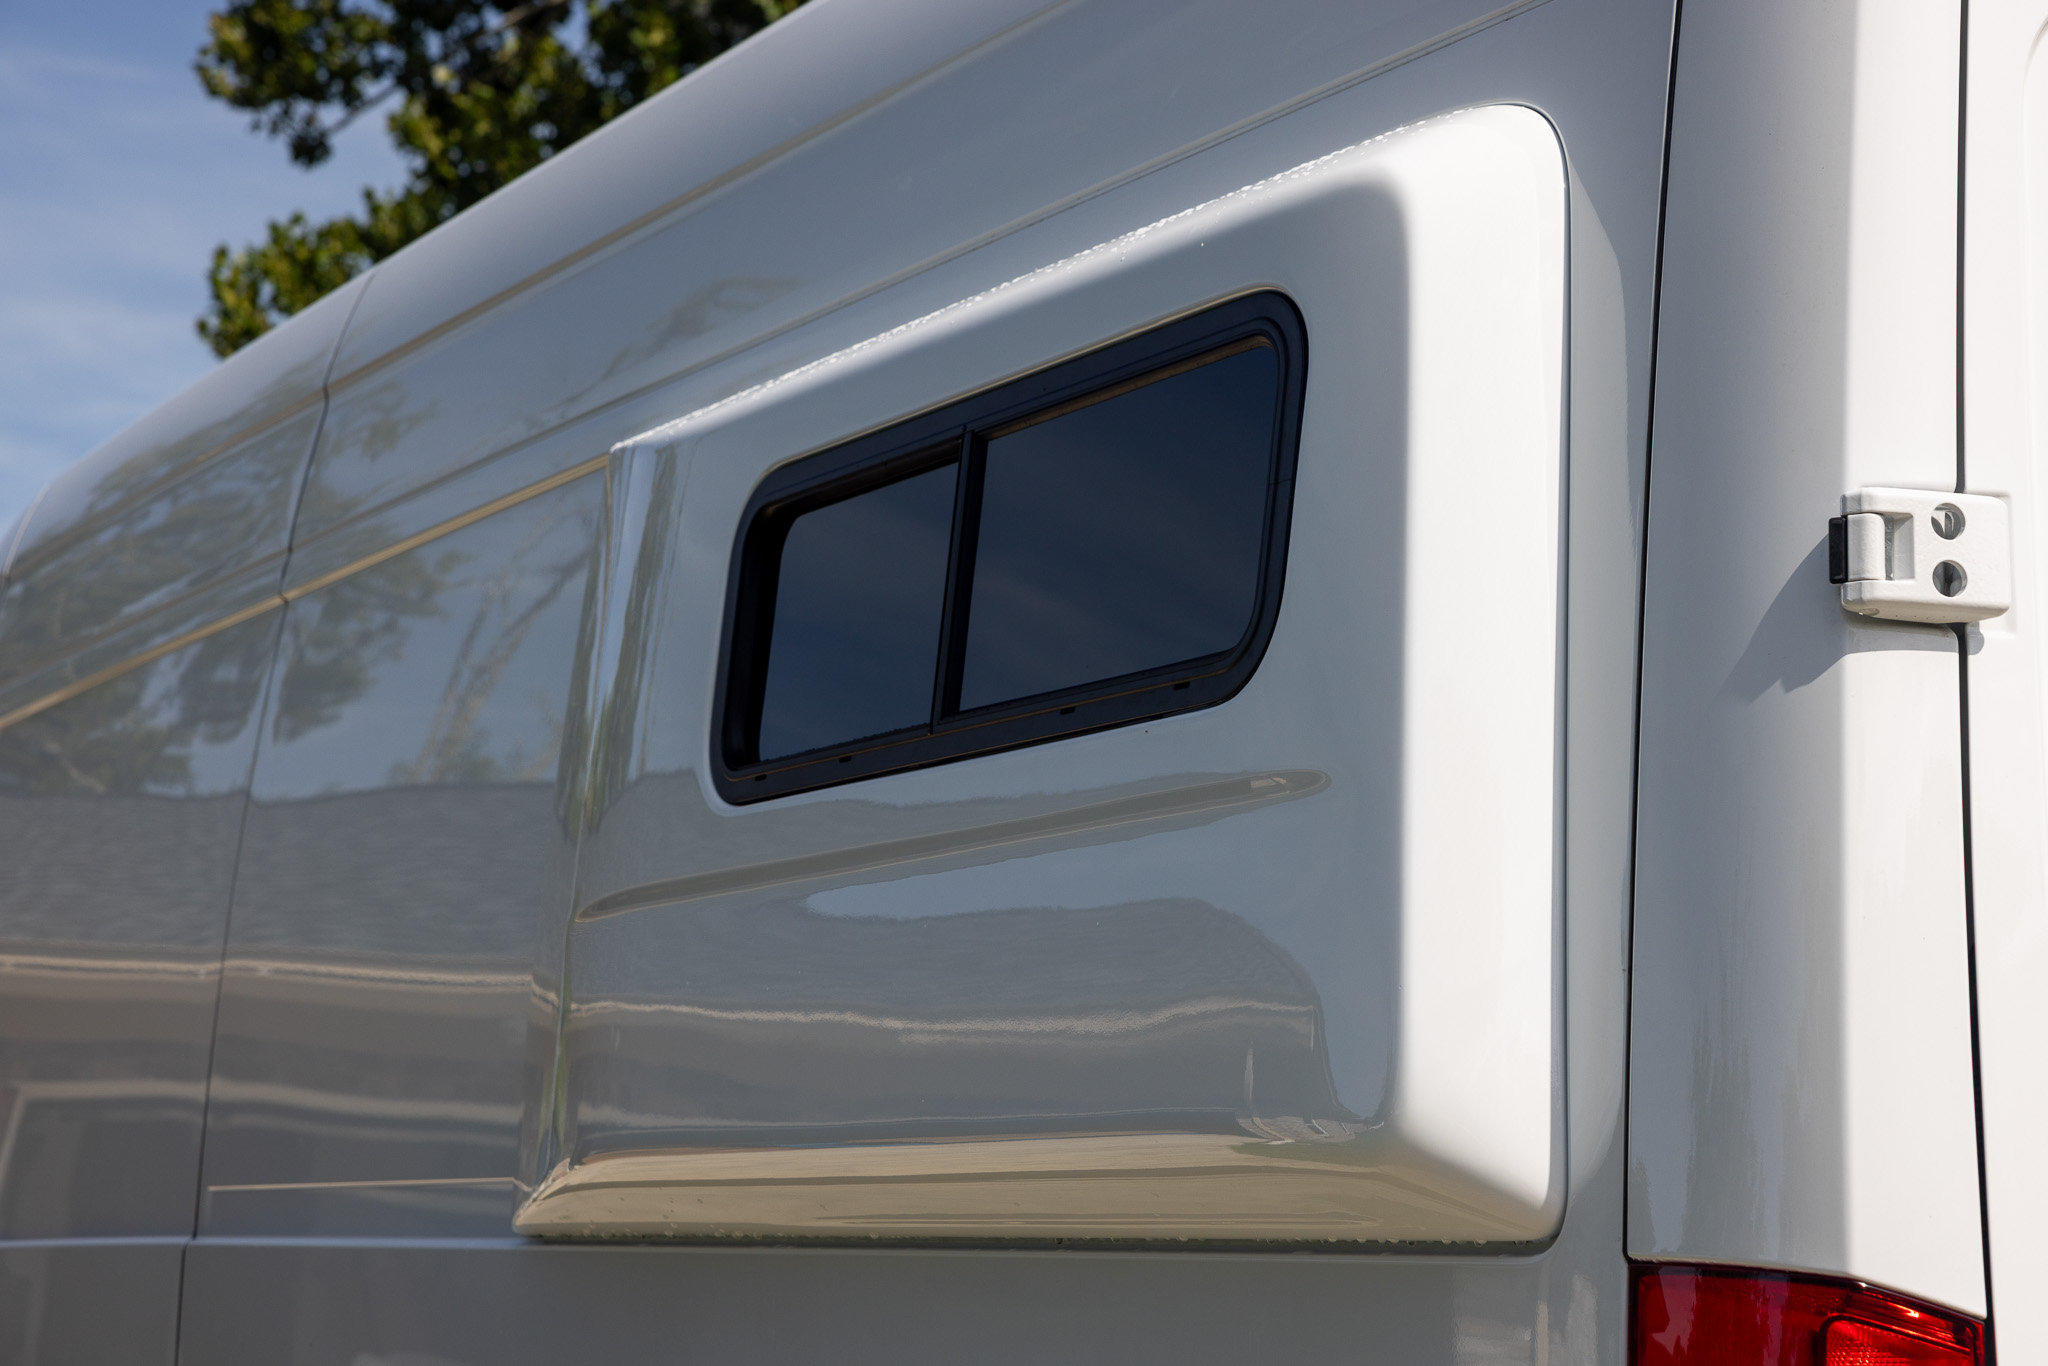 EVERYTHING you need to know about CAMPERVAN FLARES